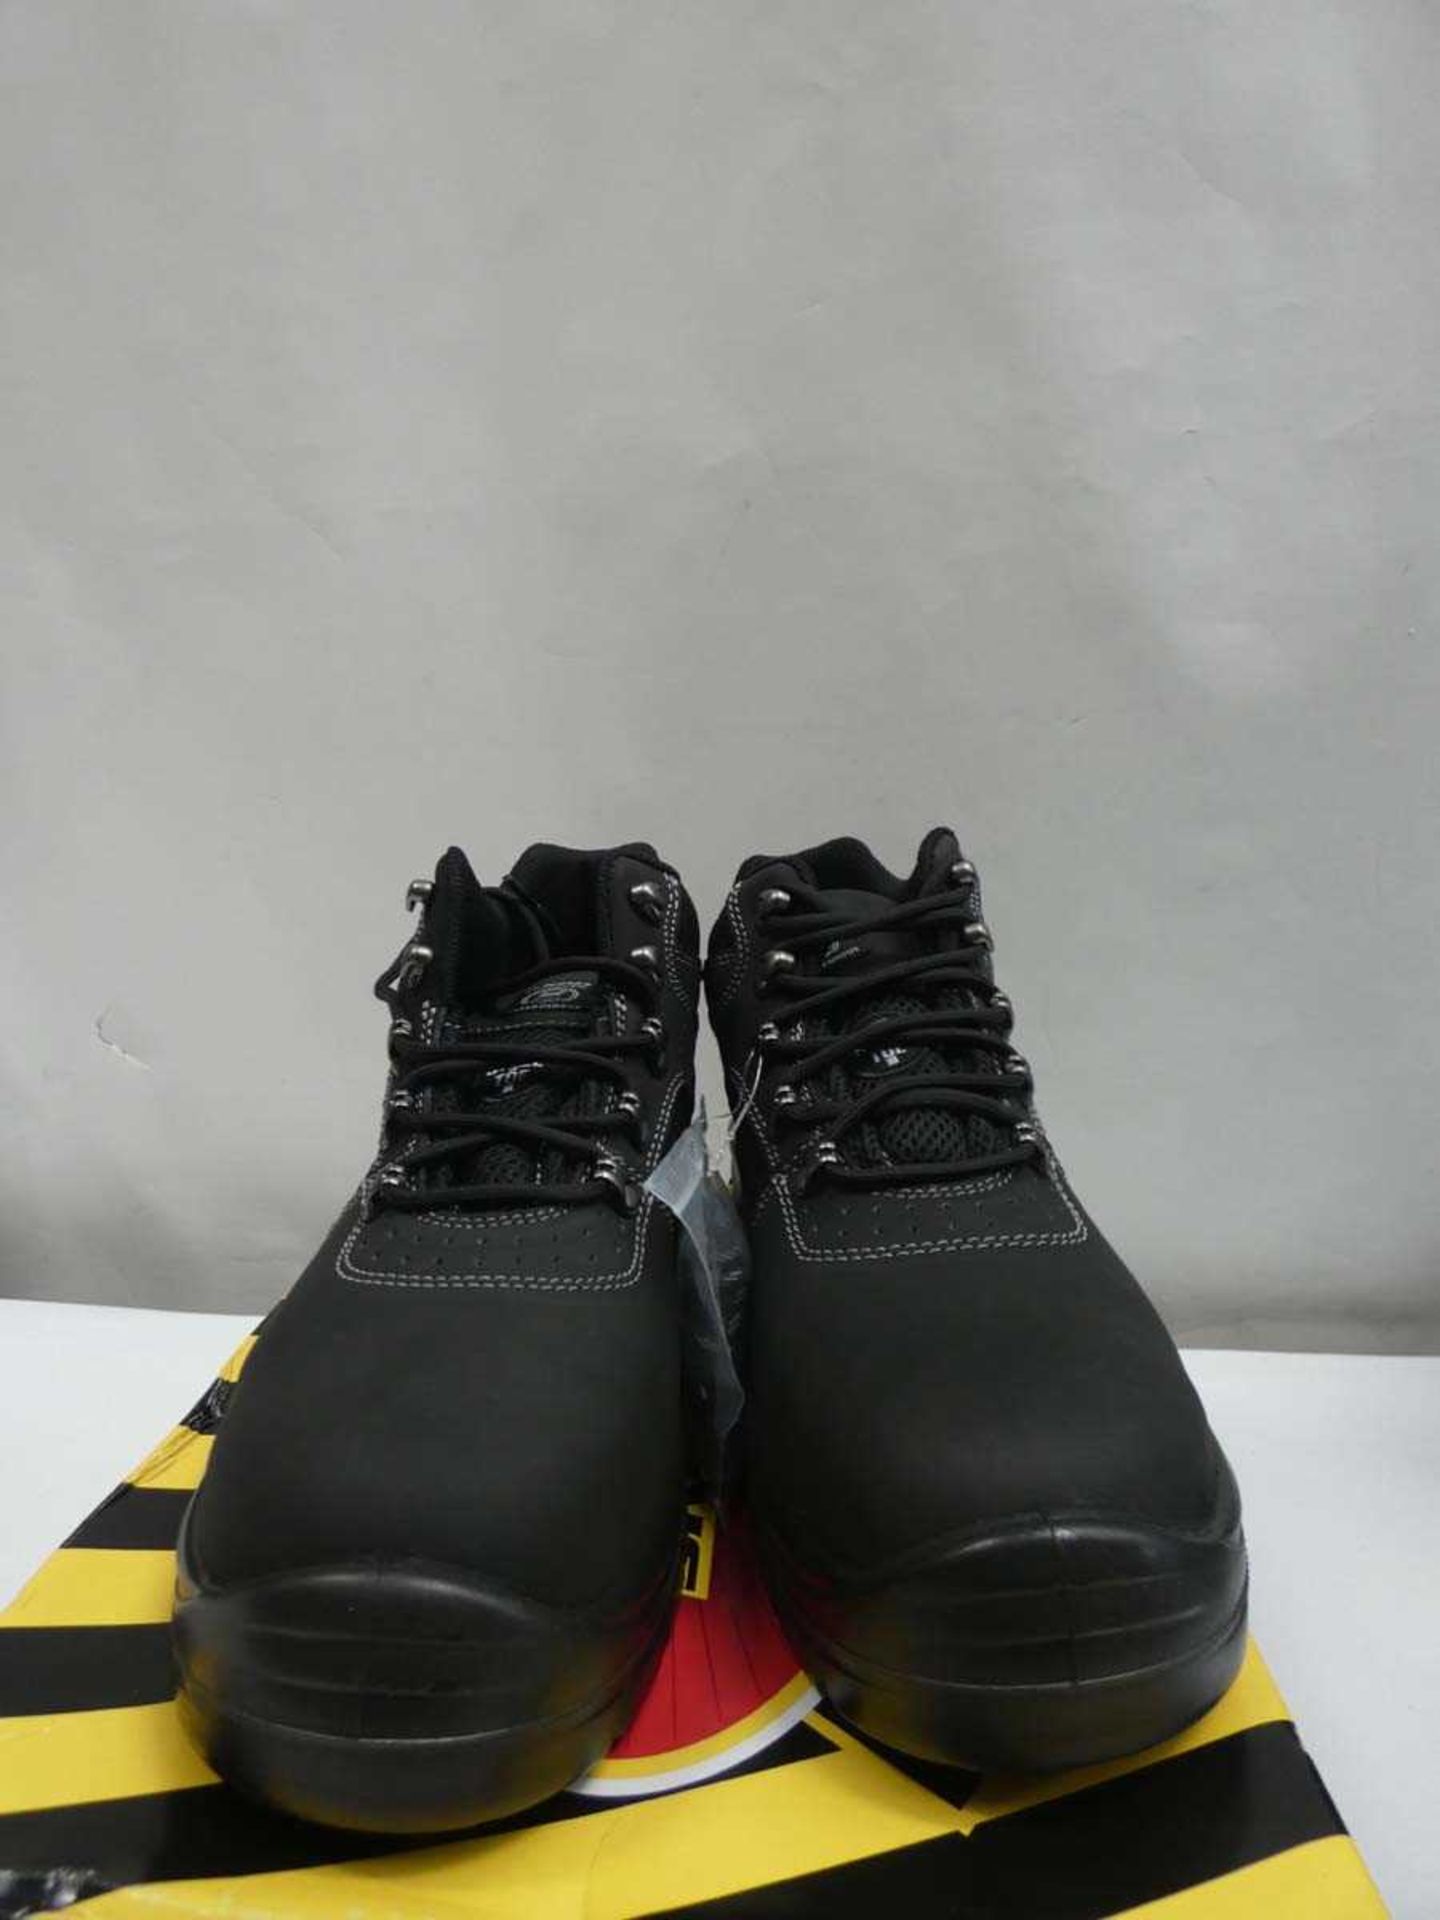 +VAT Pair of Skechers work shoes, size 10 - Image 2 of 3